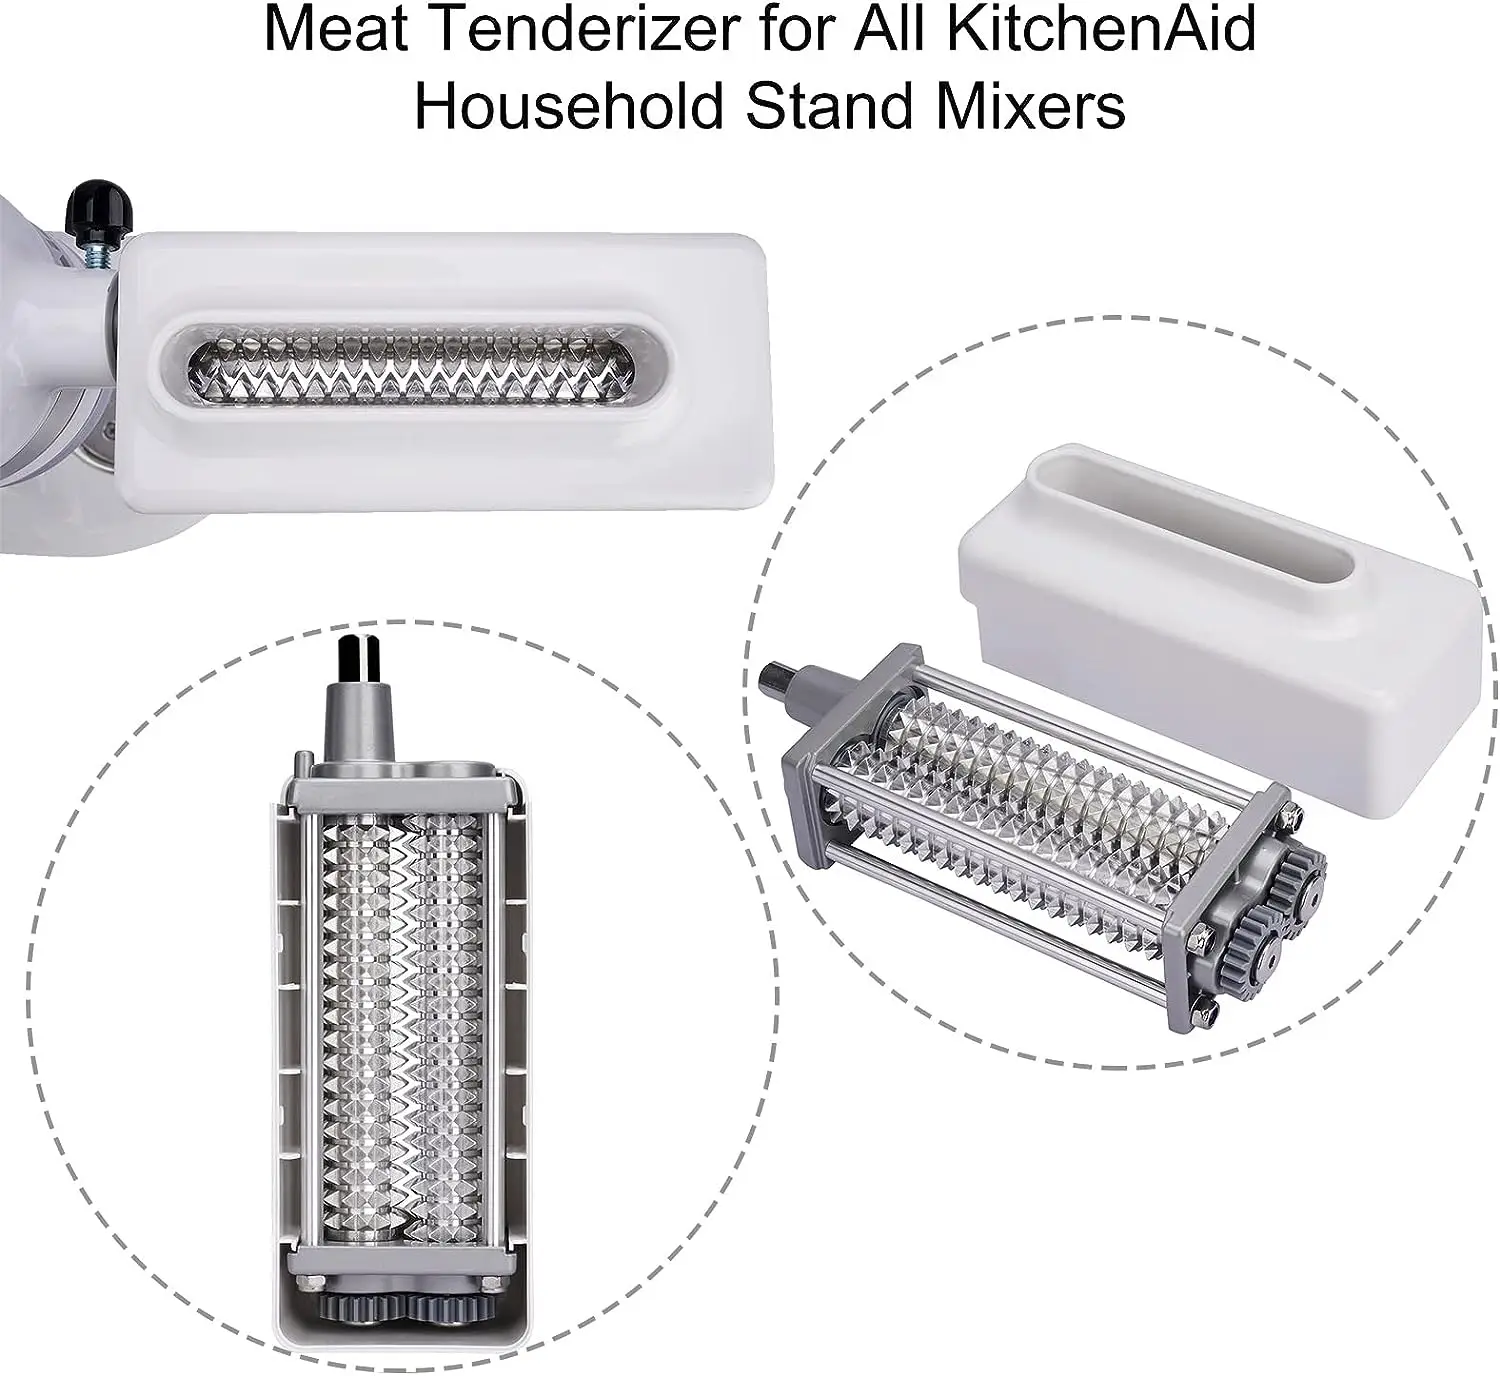 https://ae01.alicdn.com/kf/Sef85696e1d134d93a32cc5bdc3cfb148Q/Meat-Tenderizer-Attachment-for-All-KitchenAid-Household-Stand-Mixers-Mixers-Accesssories-Meat-Tenderizers.jpg